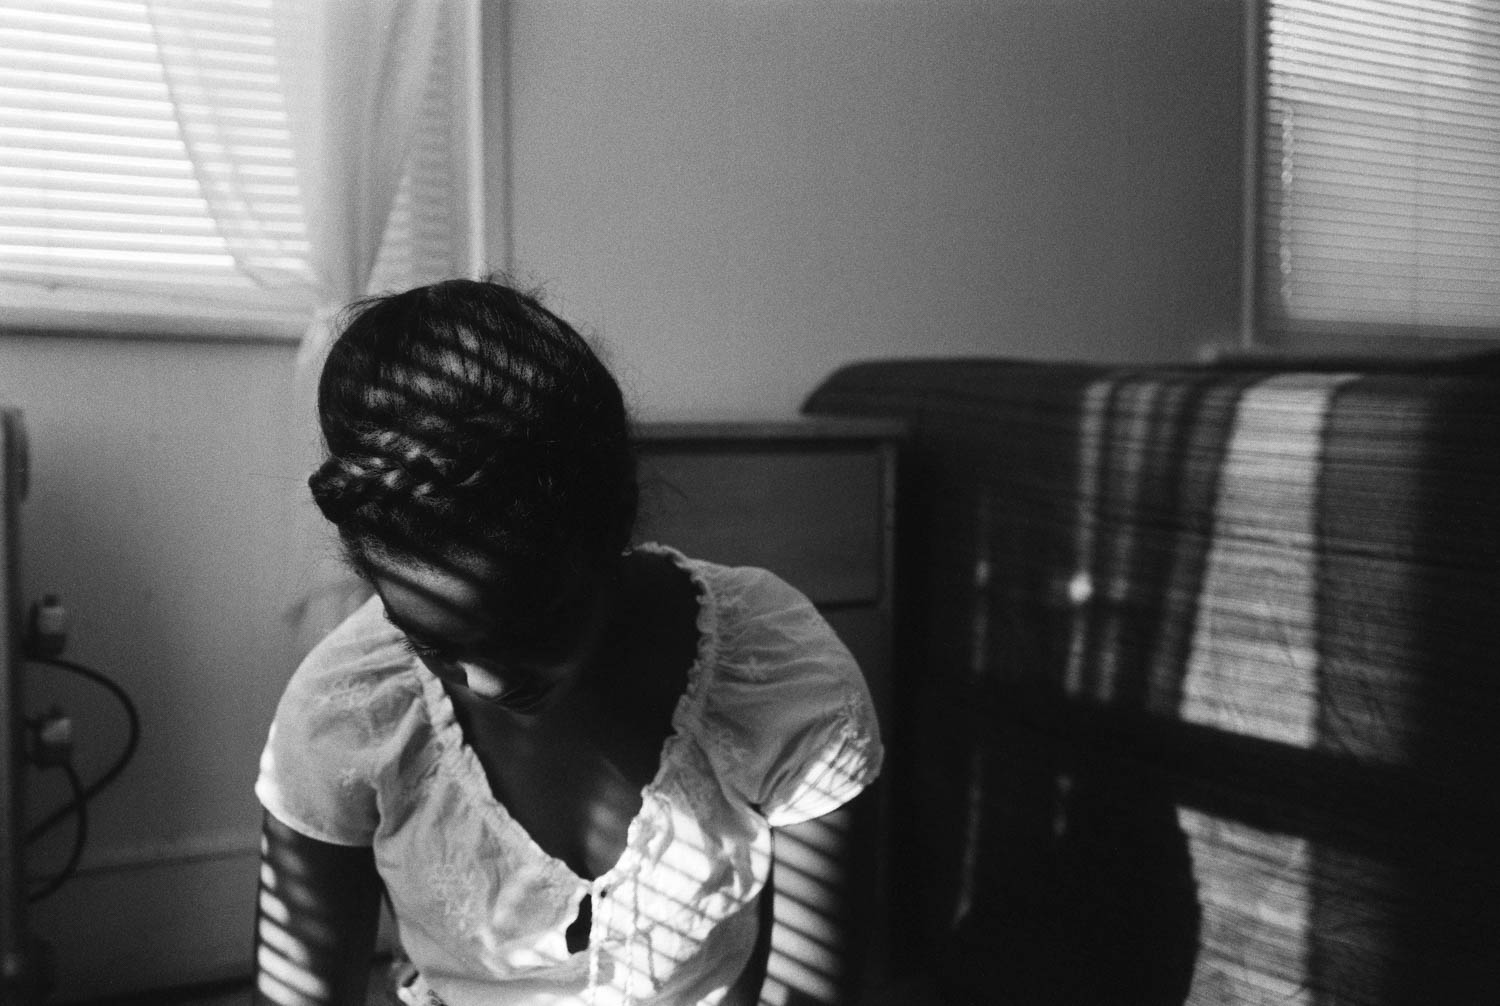 Jonelle photographed in her bedroom as shadows from the blinds fall on her face. Made with a Leica M2 on Ilford HP5+.